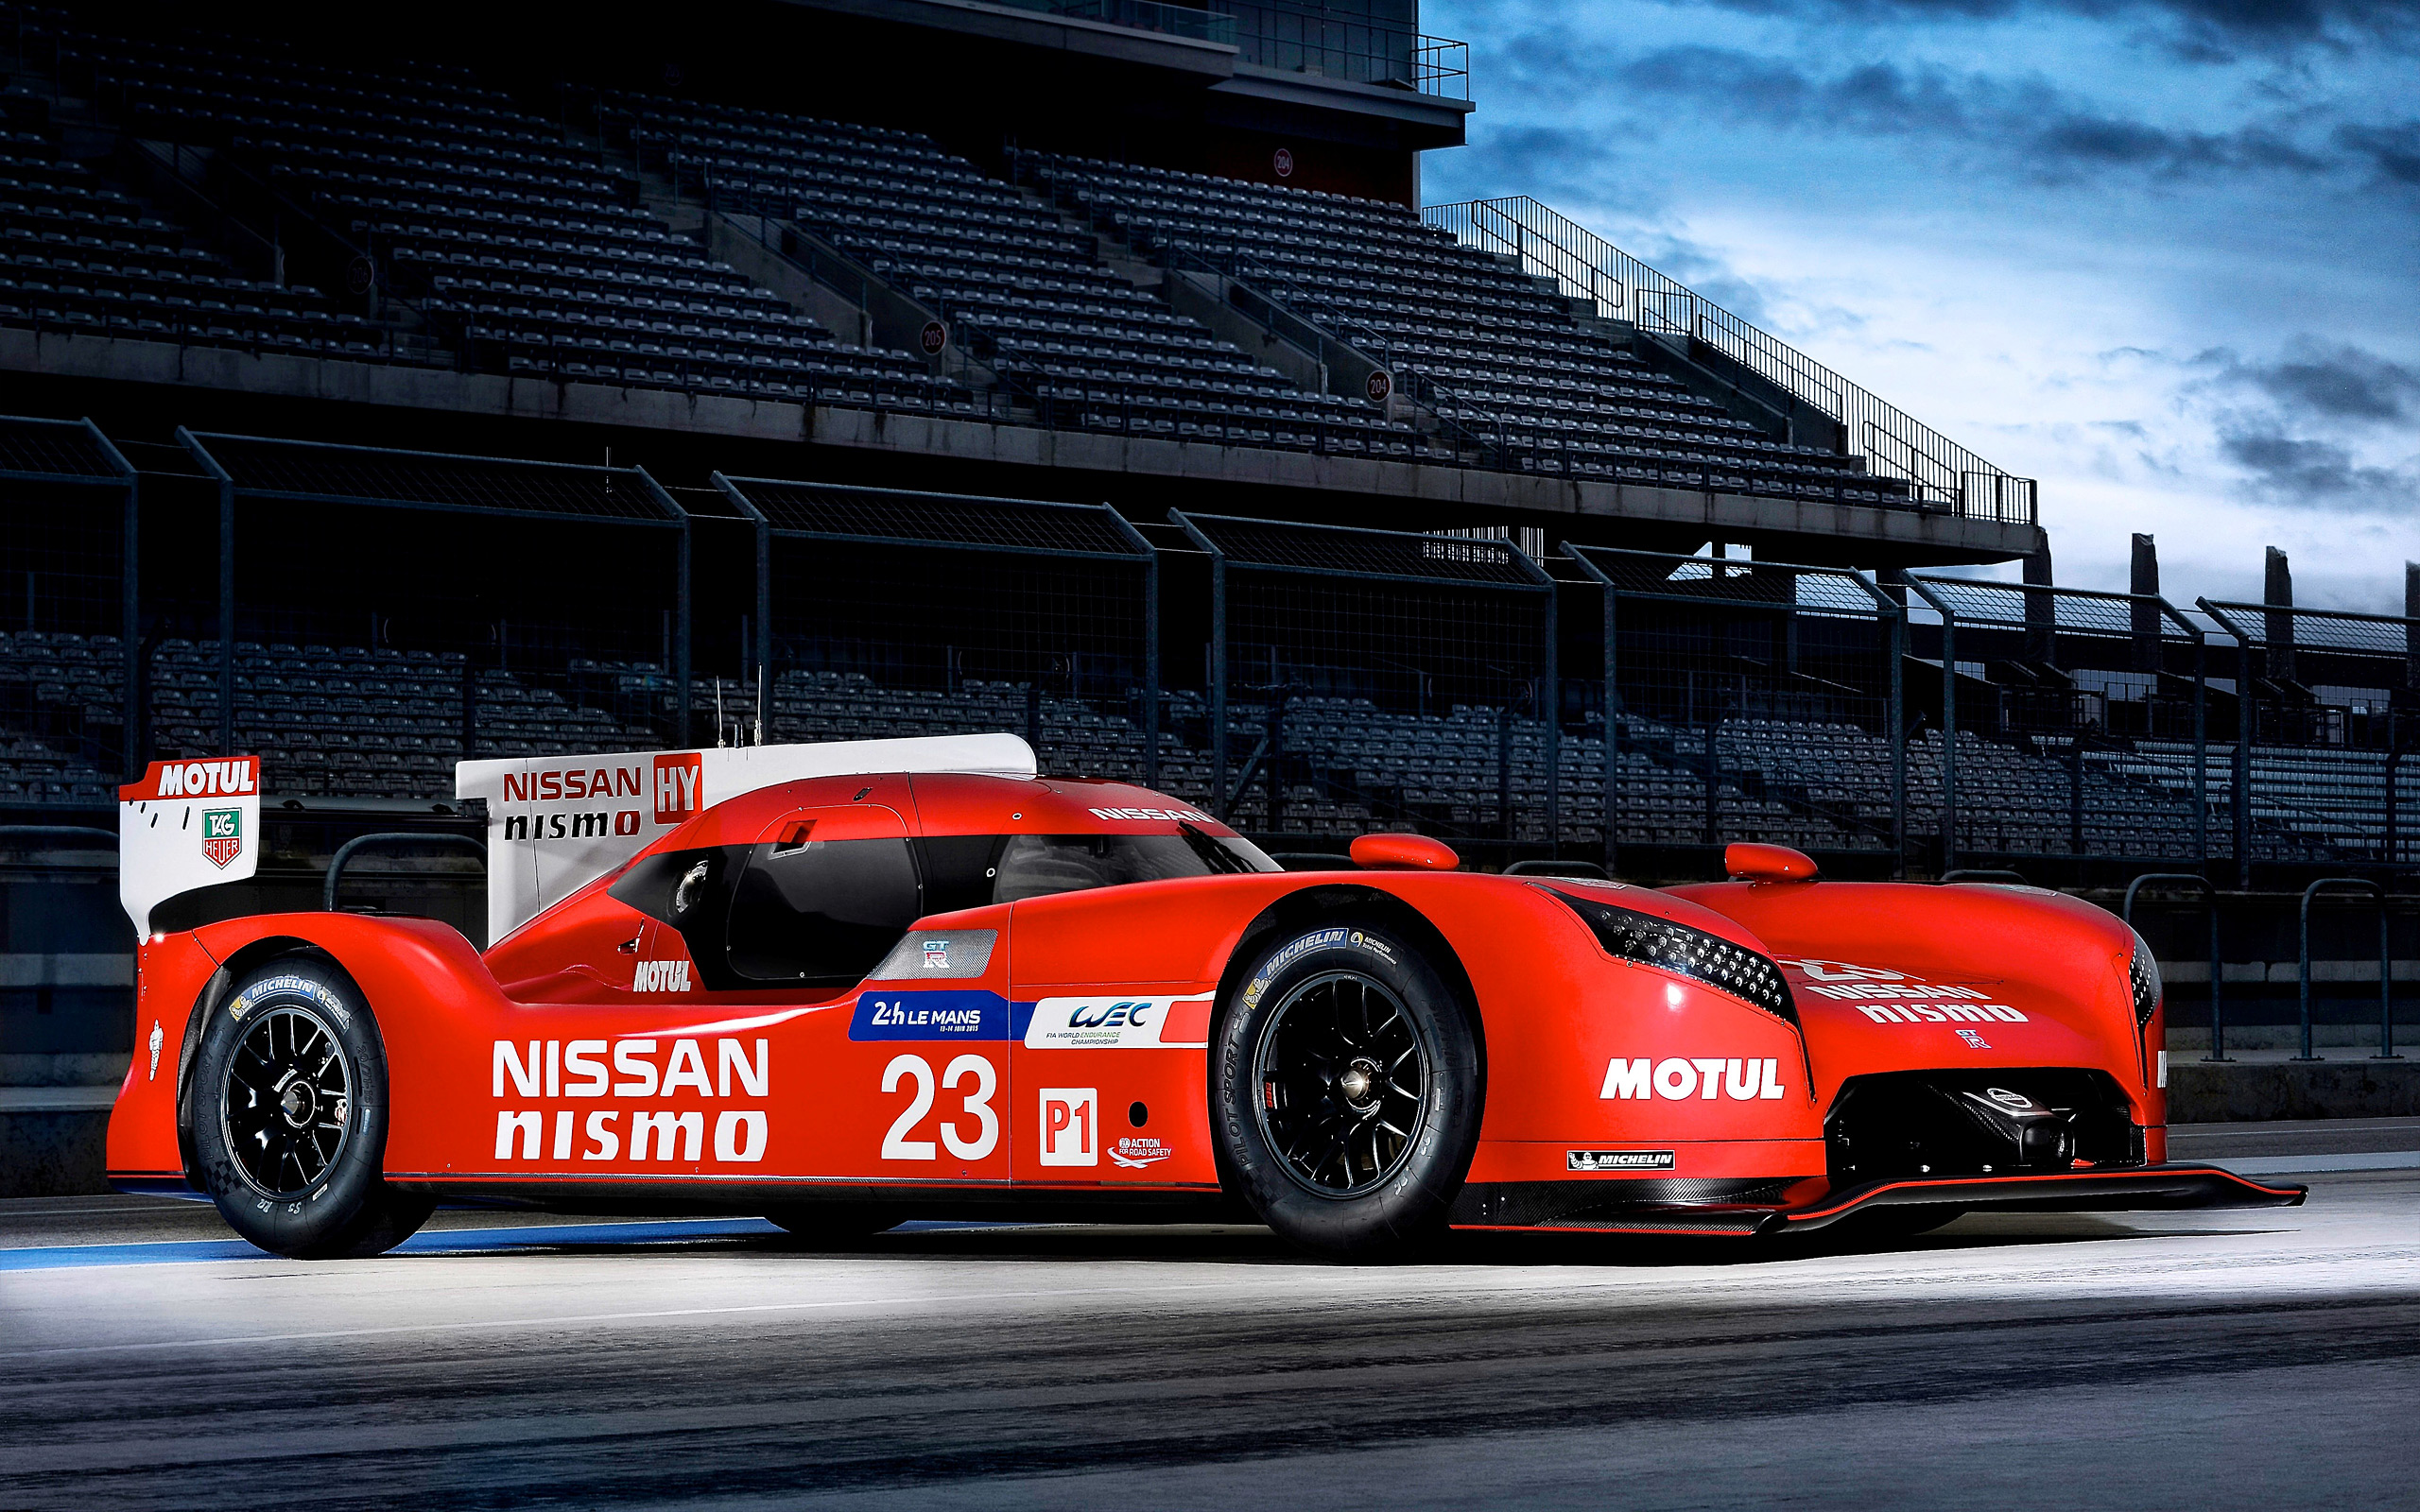 Vehicles Nissan GT-R LM Nismo HD Wallpaper | Background Image